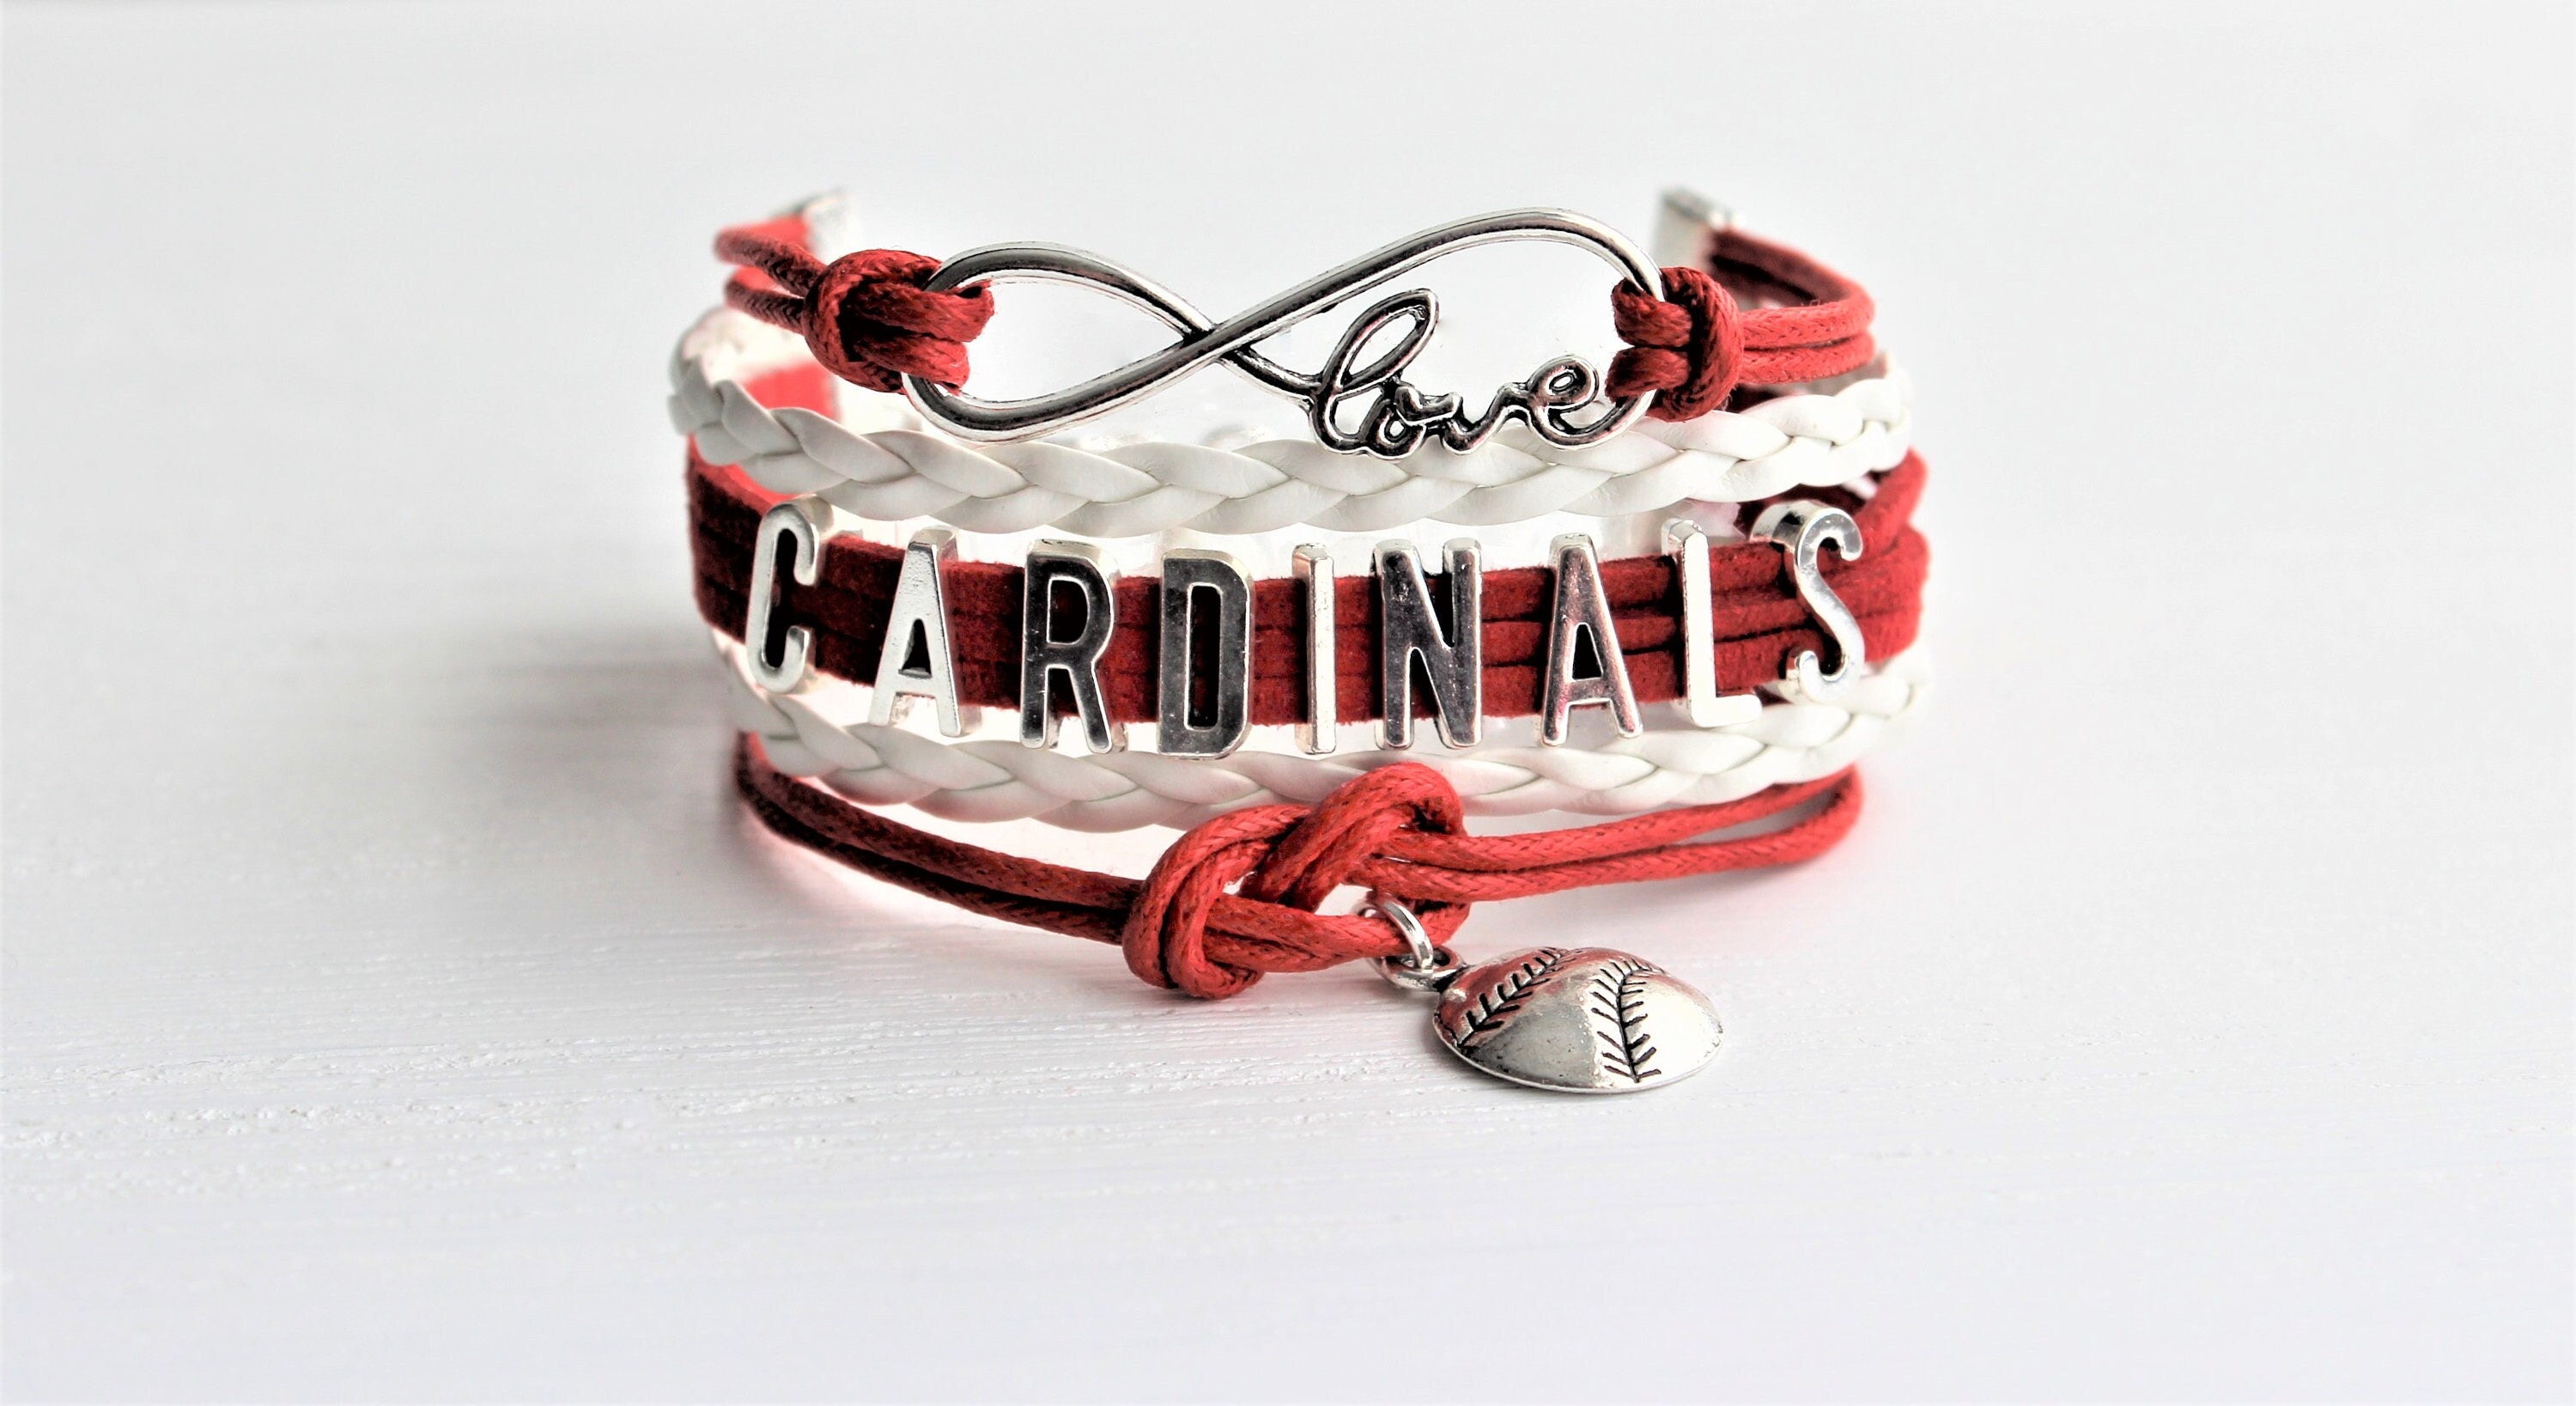 MLB NHL St Louis Cardinals & Blues Gold Leather Bracelet w/2 Logo Snap Jewelry Charms